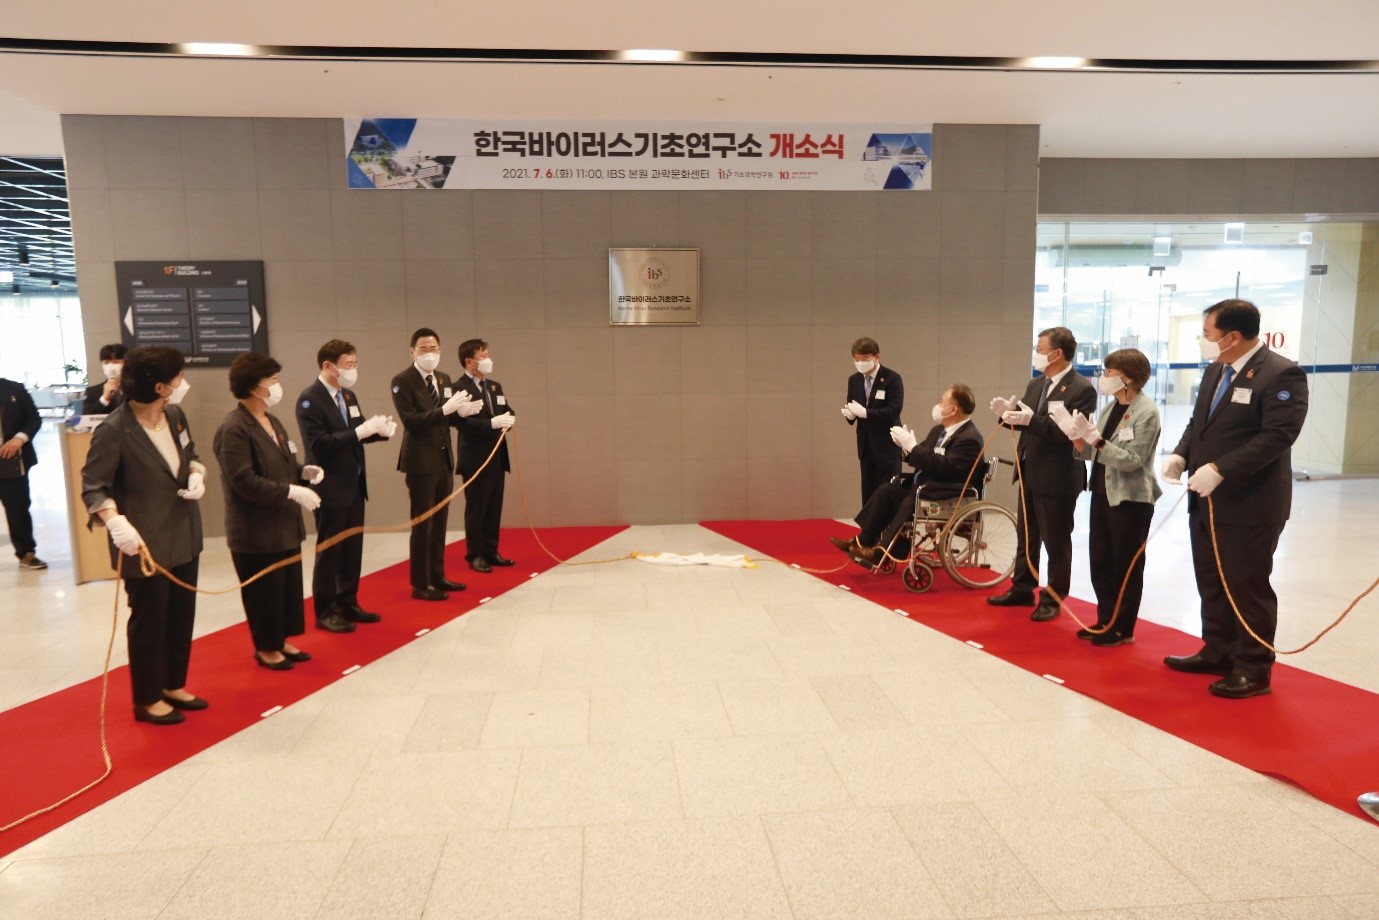 On 2021 July 6th, the Korea Virus Research Institute opening ceremony was held at the IBS Daejeon headquarters.